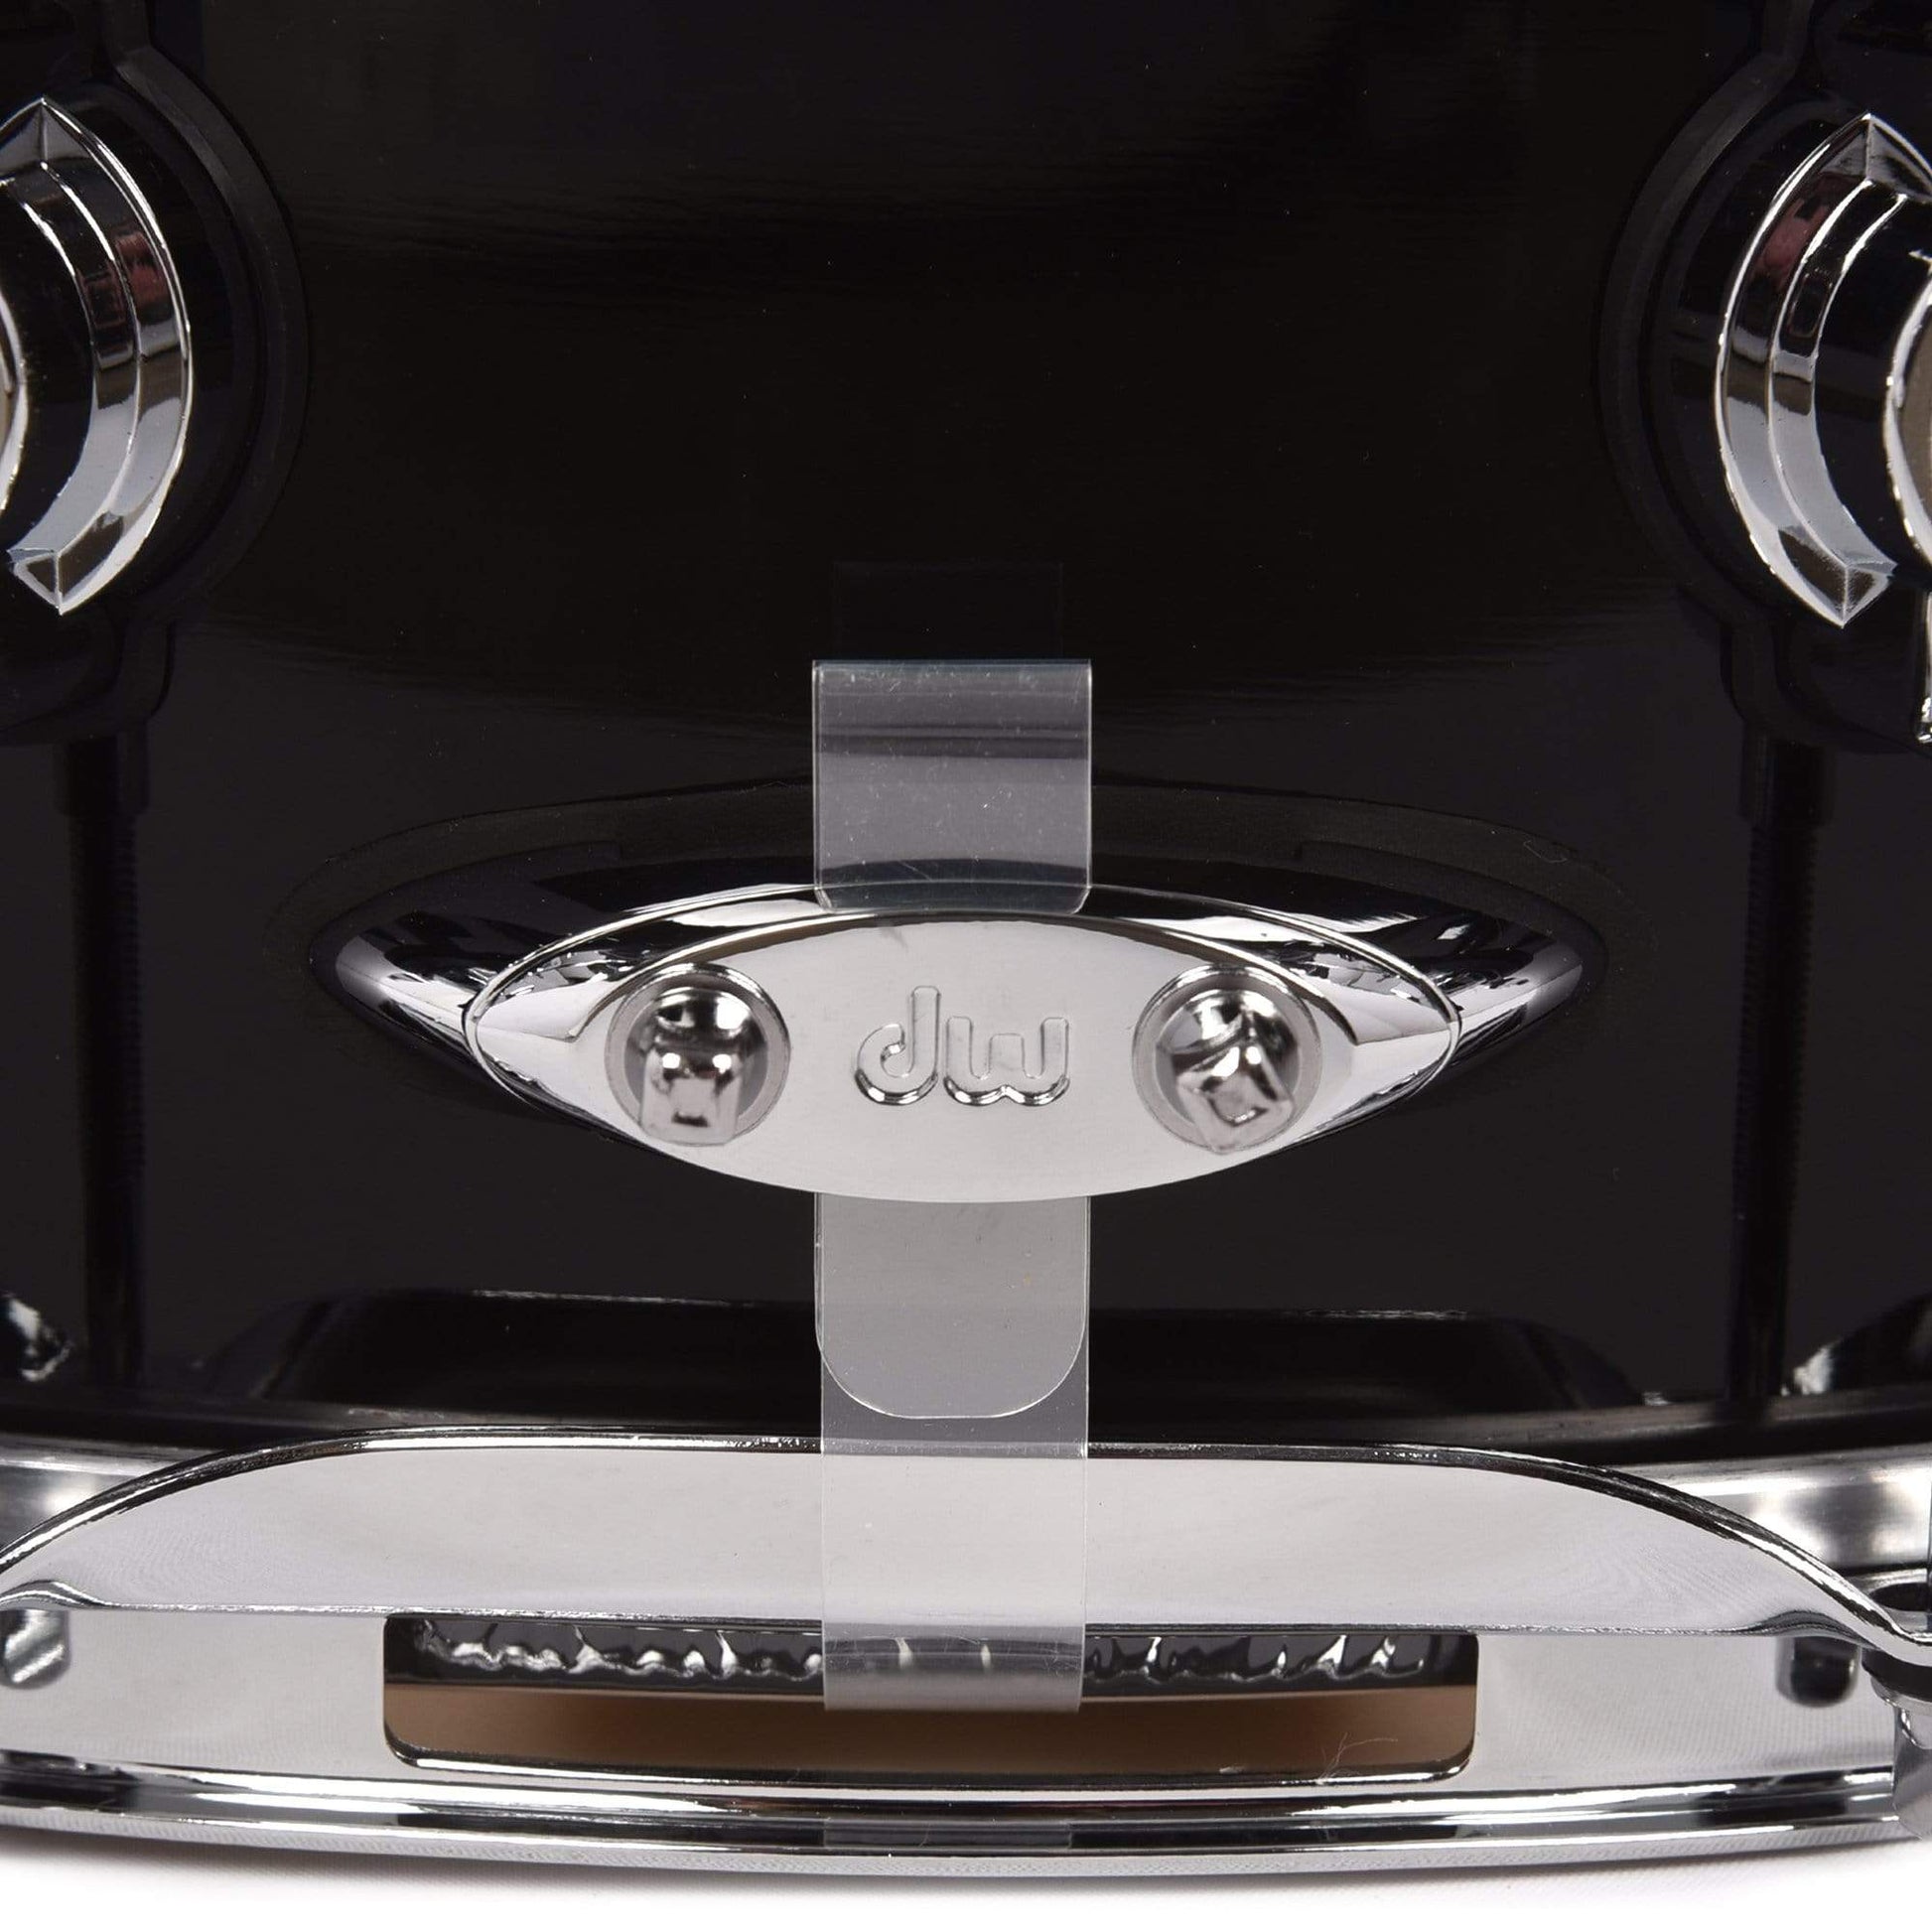 DW 6.5x14 Design Series Snare Drum Piano Black Lacquer Drums and Percussion / Acoustic Drums / Snare